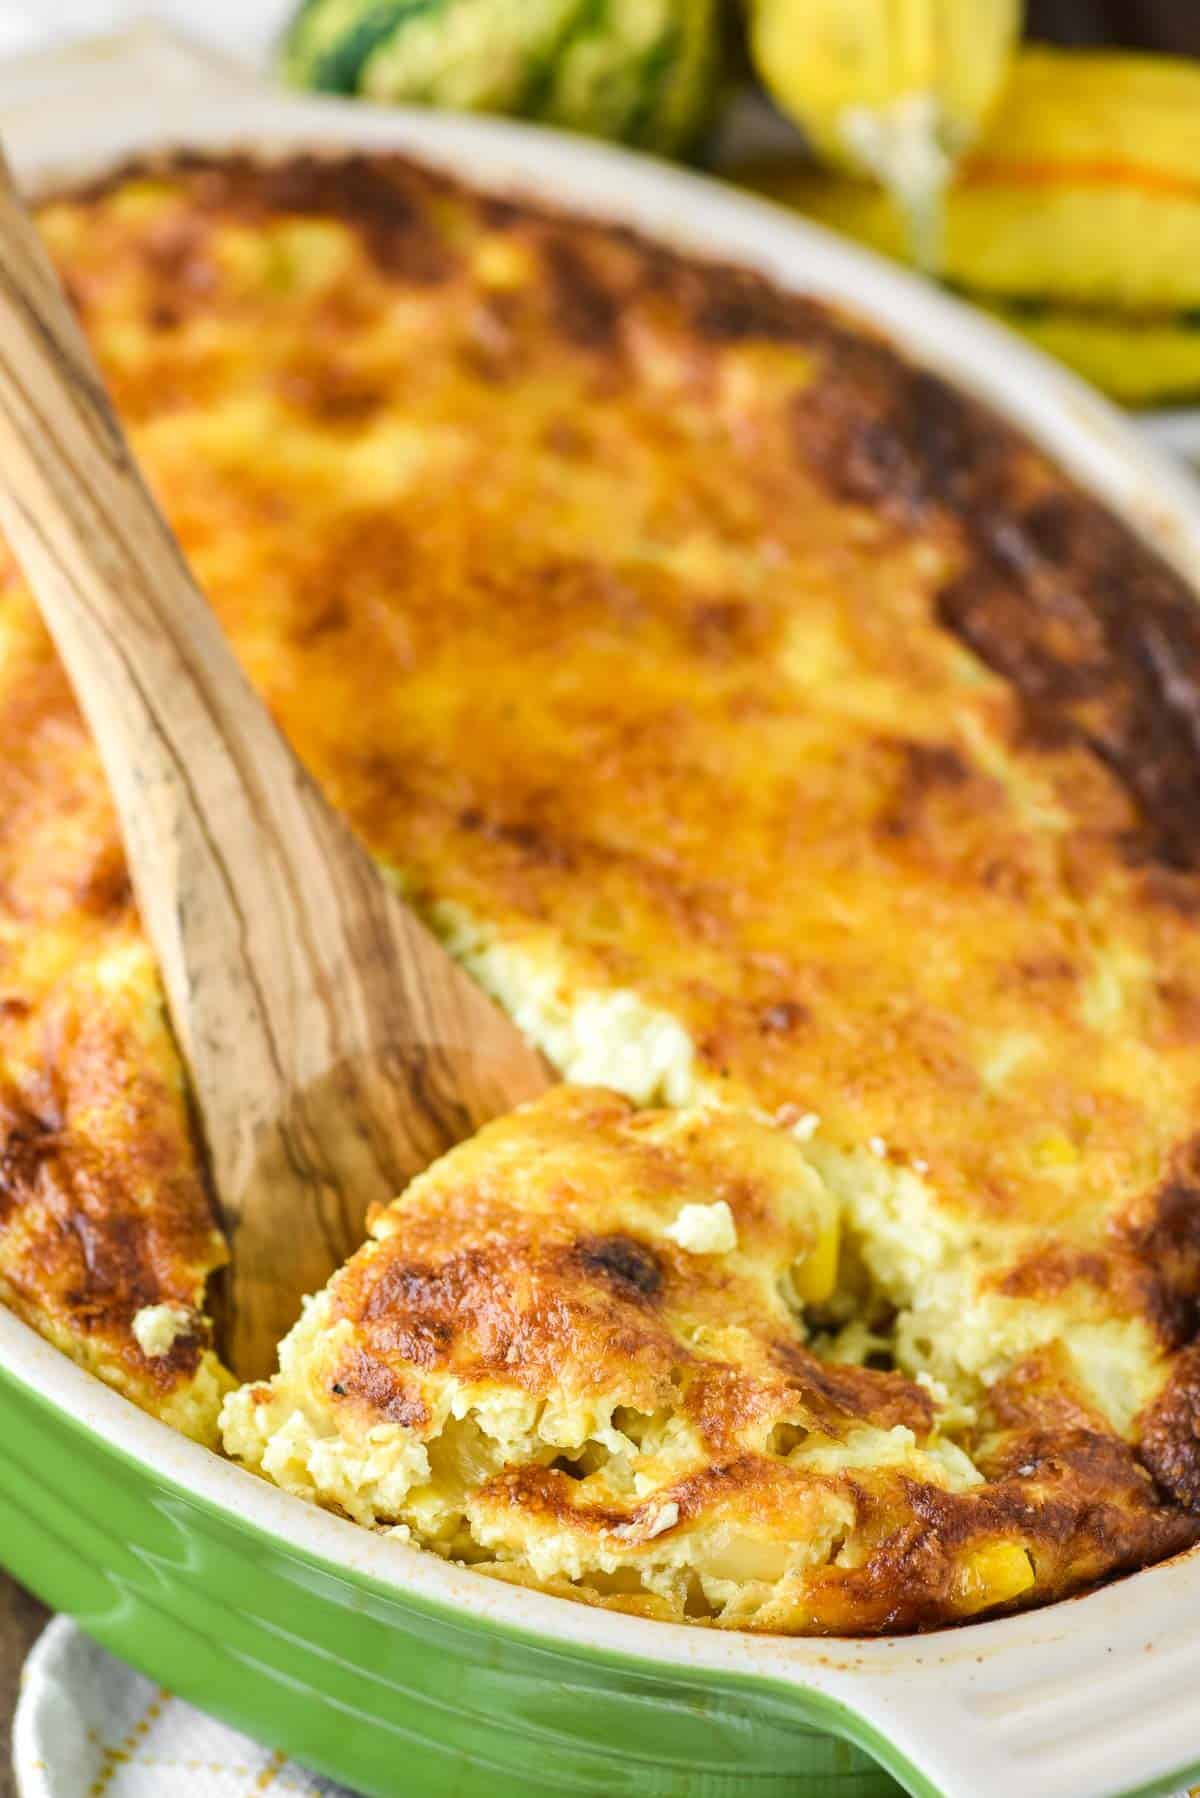 wooden spoon dipped in sweet corn pudding in green baking dish